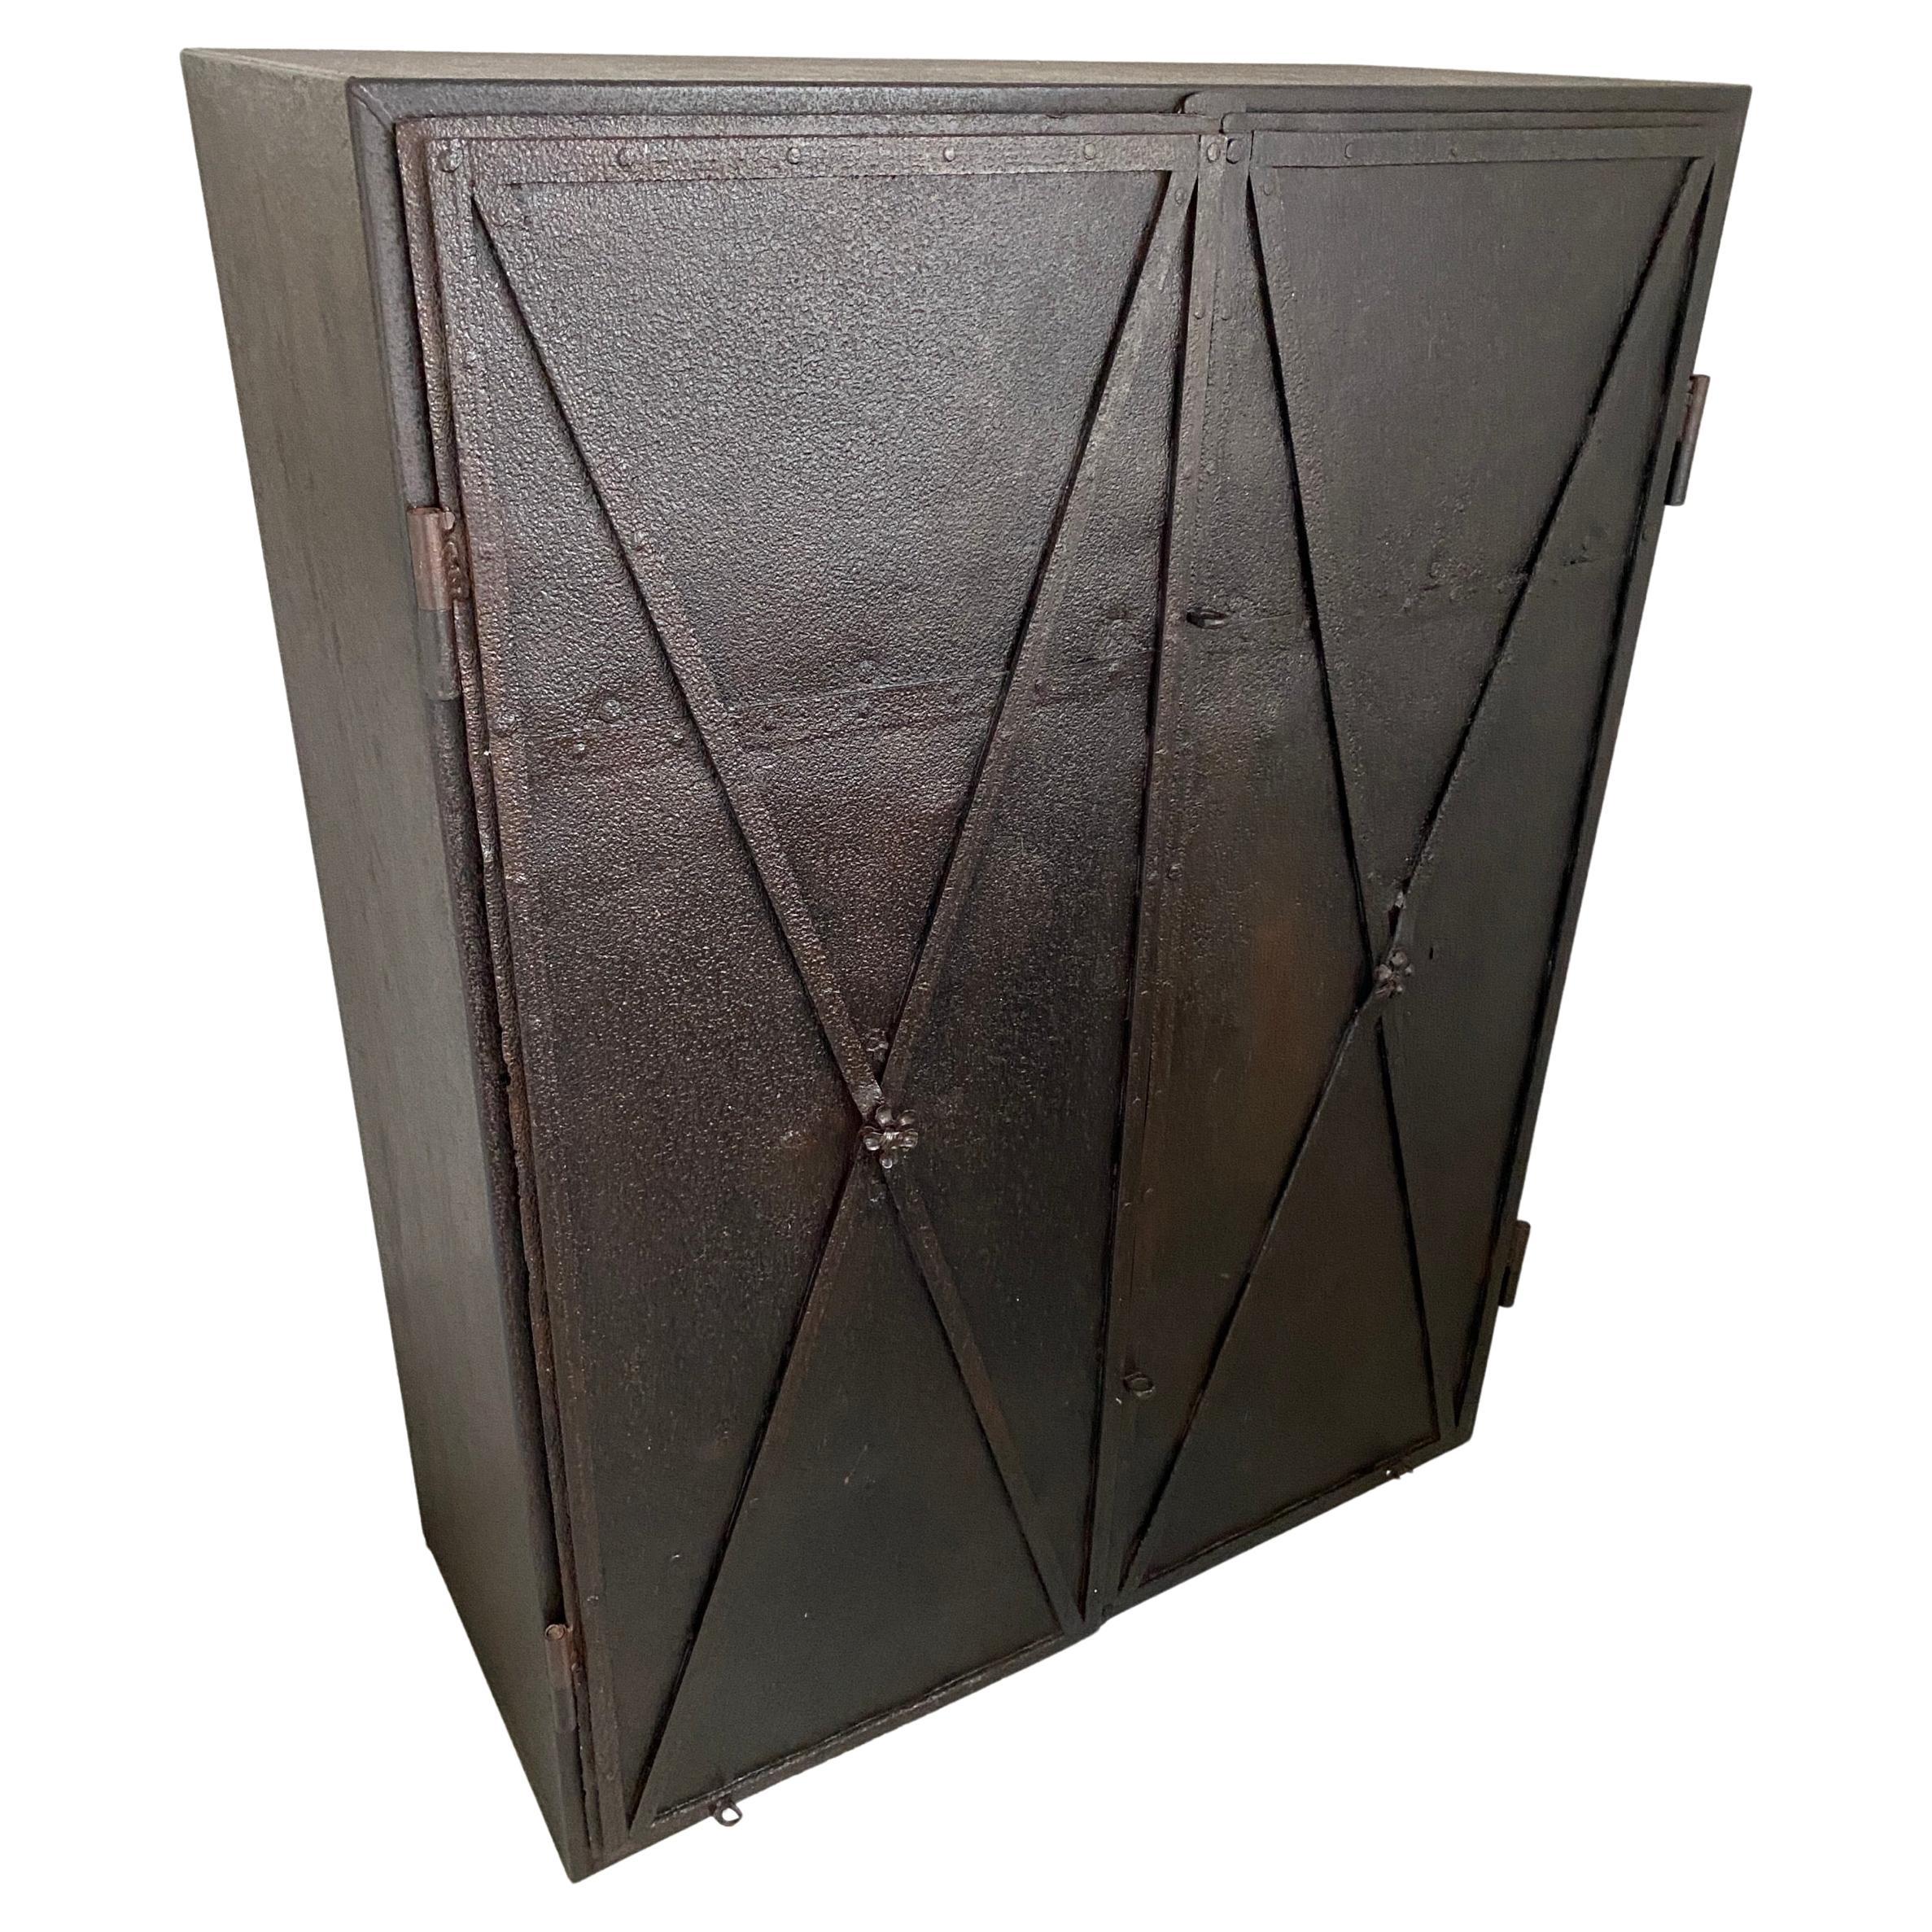 These Directoire period metal doors were once window shutters on an 18th century French chateau that now have been repurposed and made into doors for this cabinet which can lend itself to many uses such as a bar or storage cabinet. The doors are